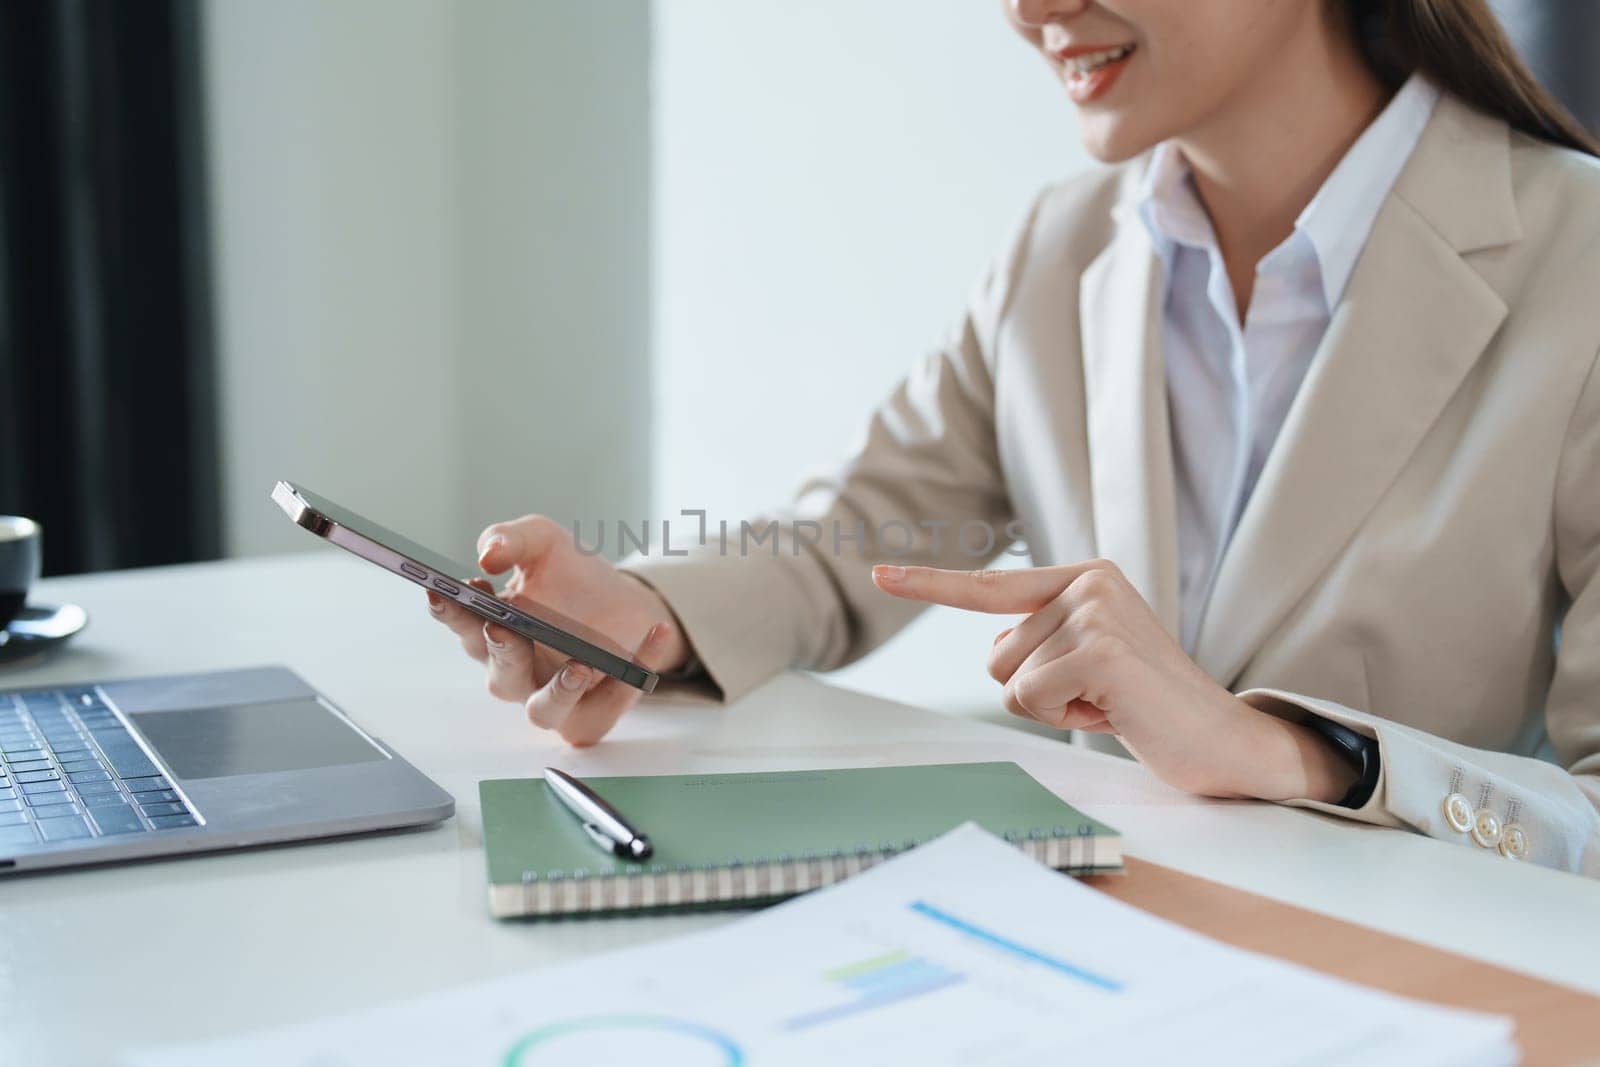 Portrait of a young Asian woman showing a smiling face as she uses her phone, computer and financial documents on her desk in the early morning hours by Manastrong